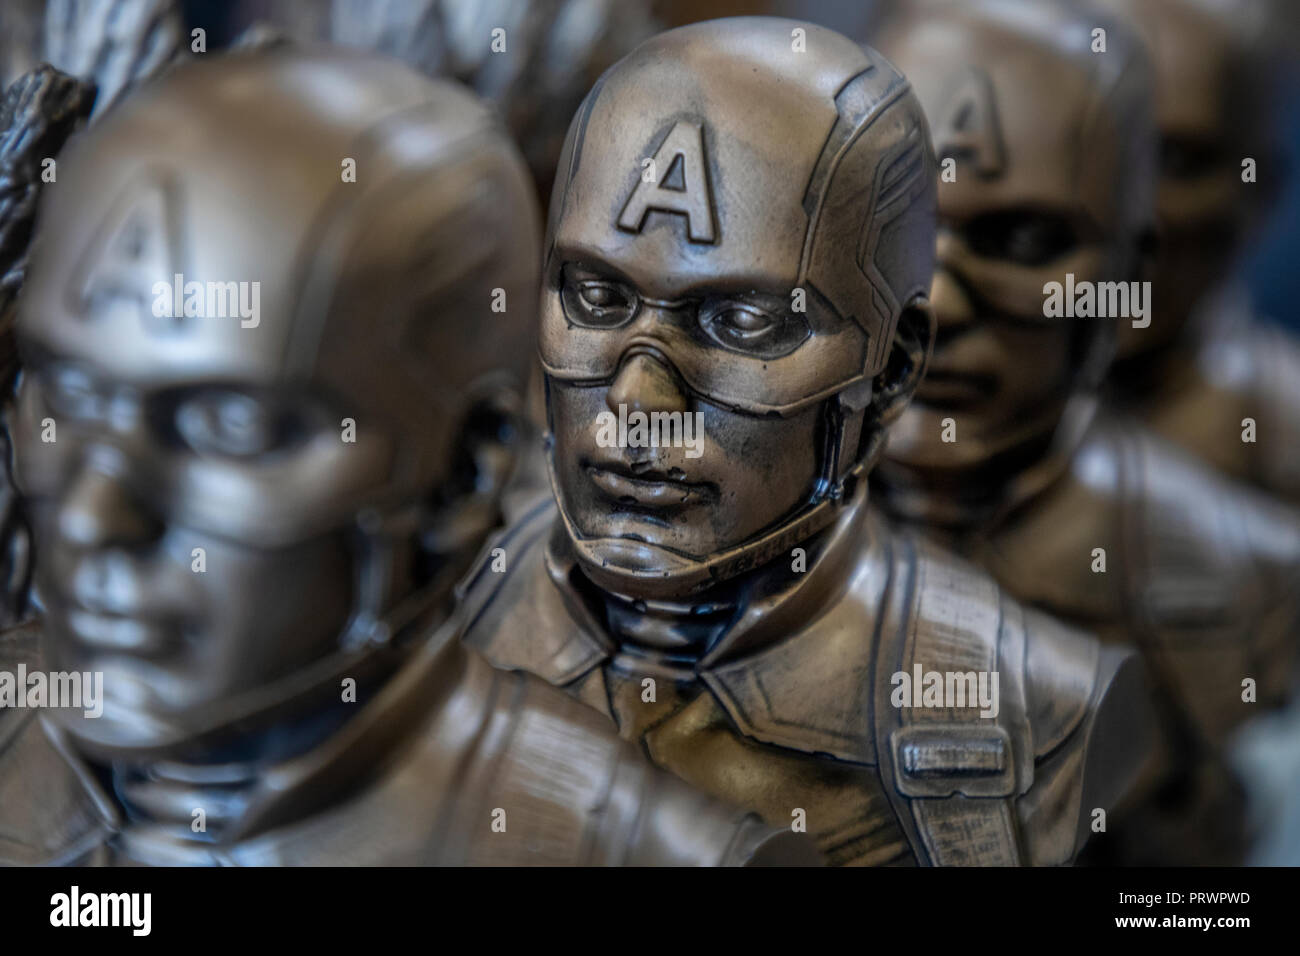 Moscow, Russia. 04 October, 2018 A bust of Captain America at the shop counter at the 2018 Igromir computer and video games exhibition, at Crocus Expo International Exhibition Center in Moscow region, Russia Credit: Nikolay Vinokurov/Alamy Live News Stock Photo